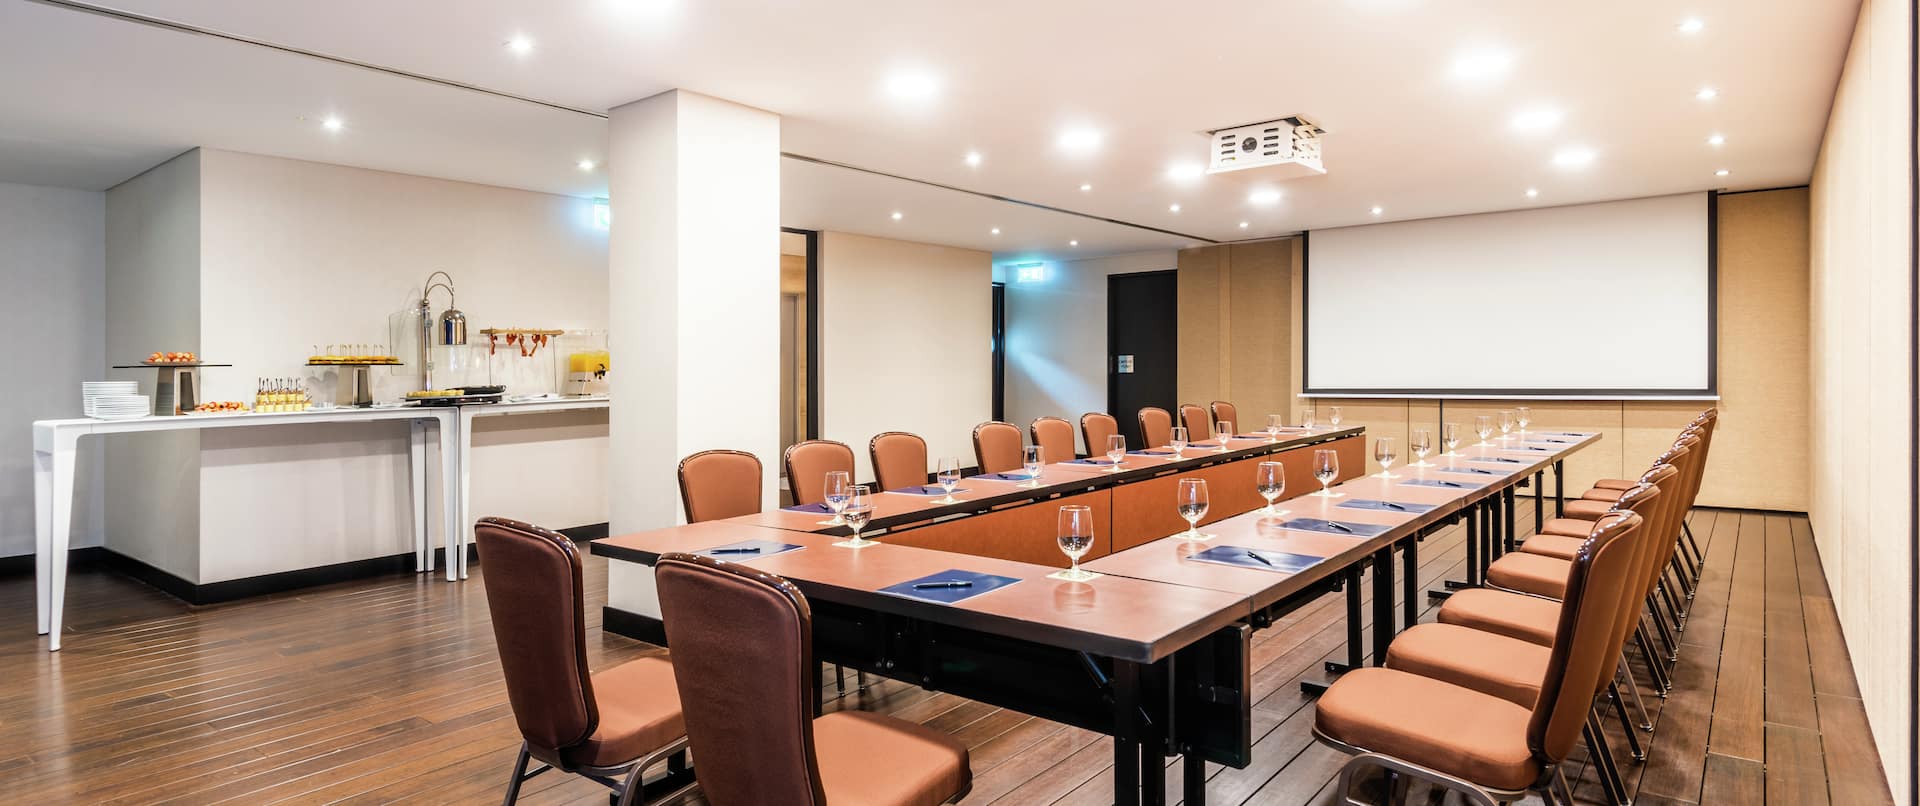 U Set Up Meeting Room with Seating for 20 Guests